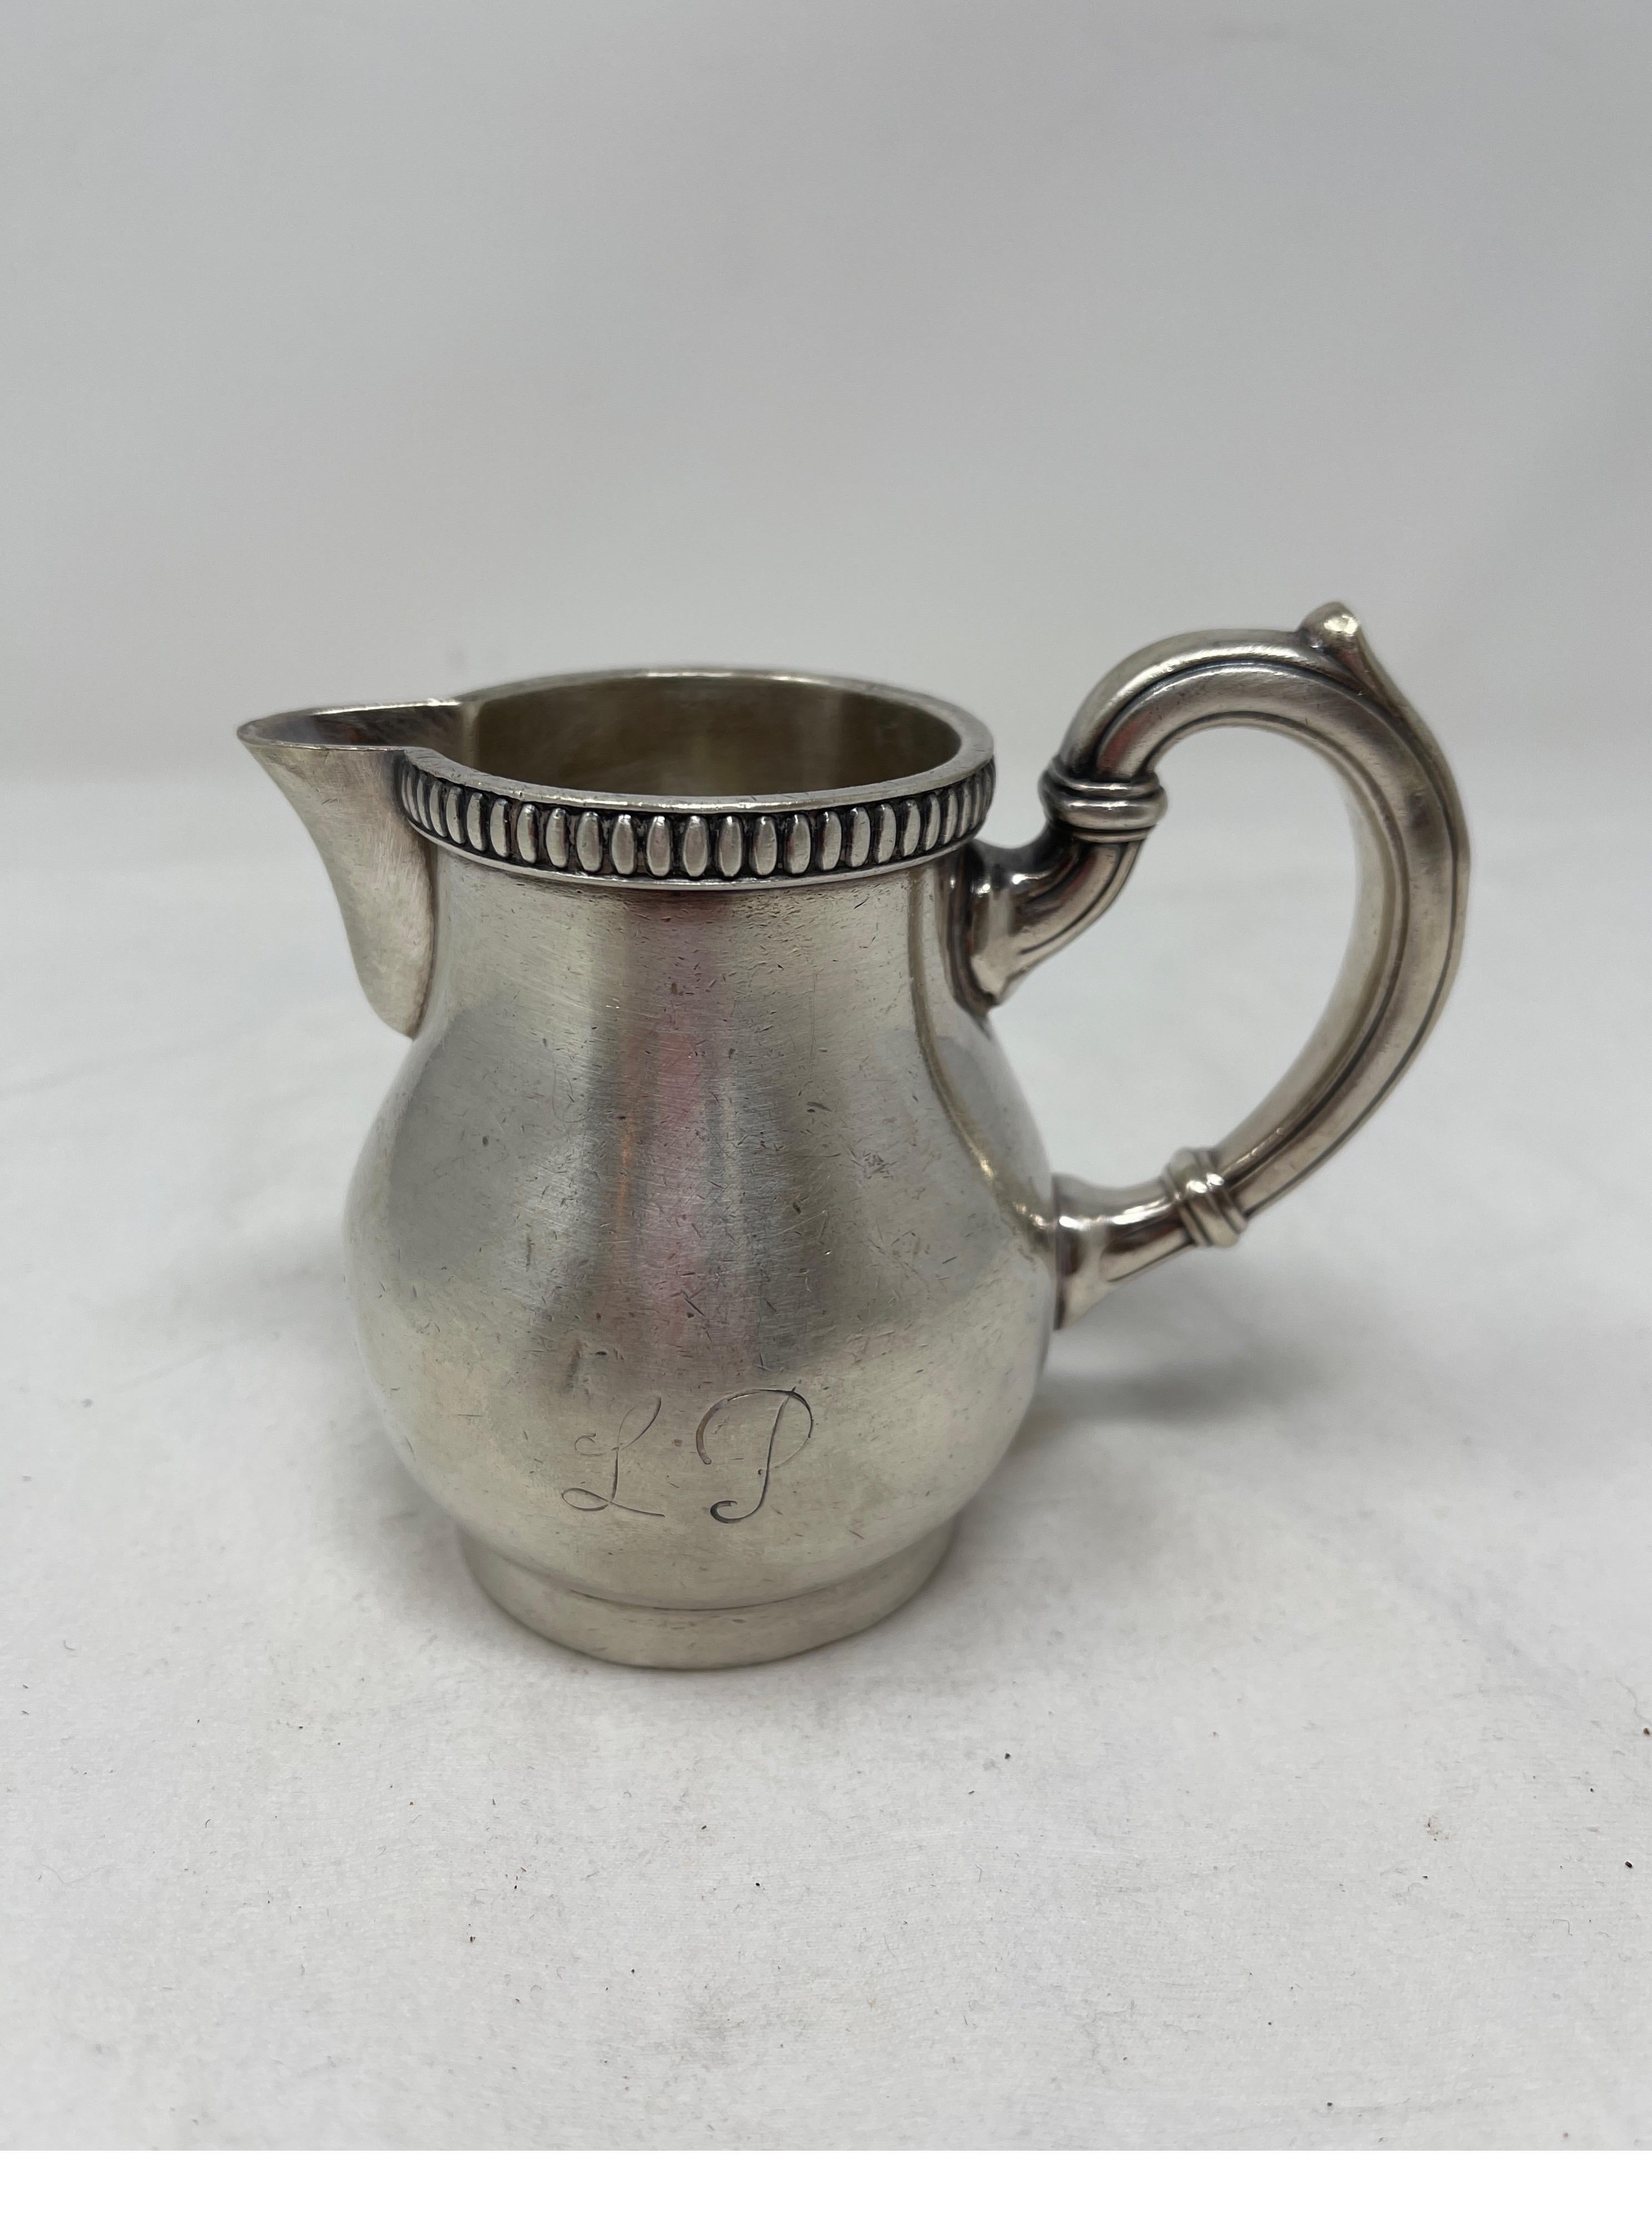 Enjoy your coffee or tea with this adorable little 19th century Hotel Silver creamer. Elevate your morning routine or use this pitcher to old pens, pencils or a fresh cut flower.

2.38 